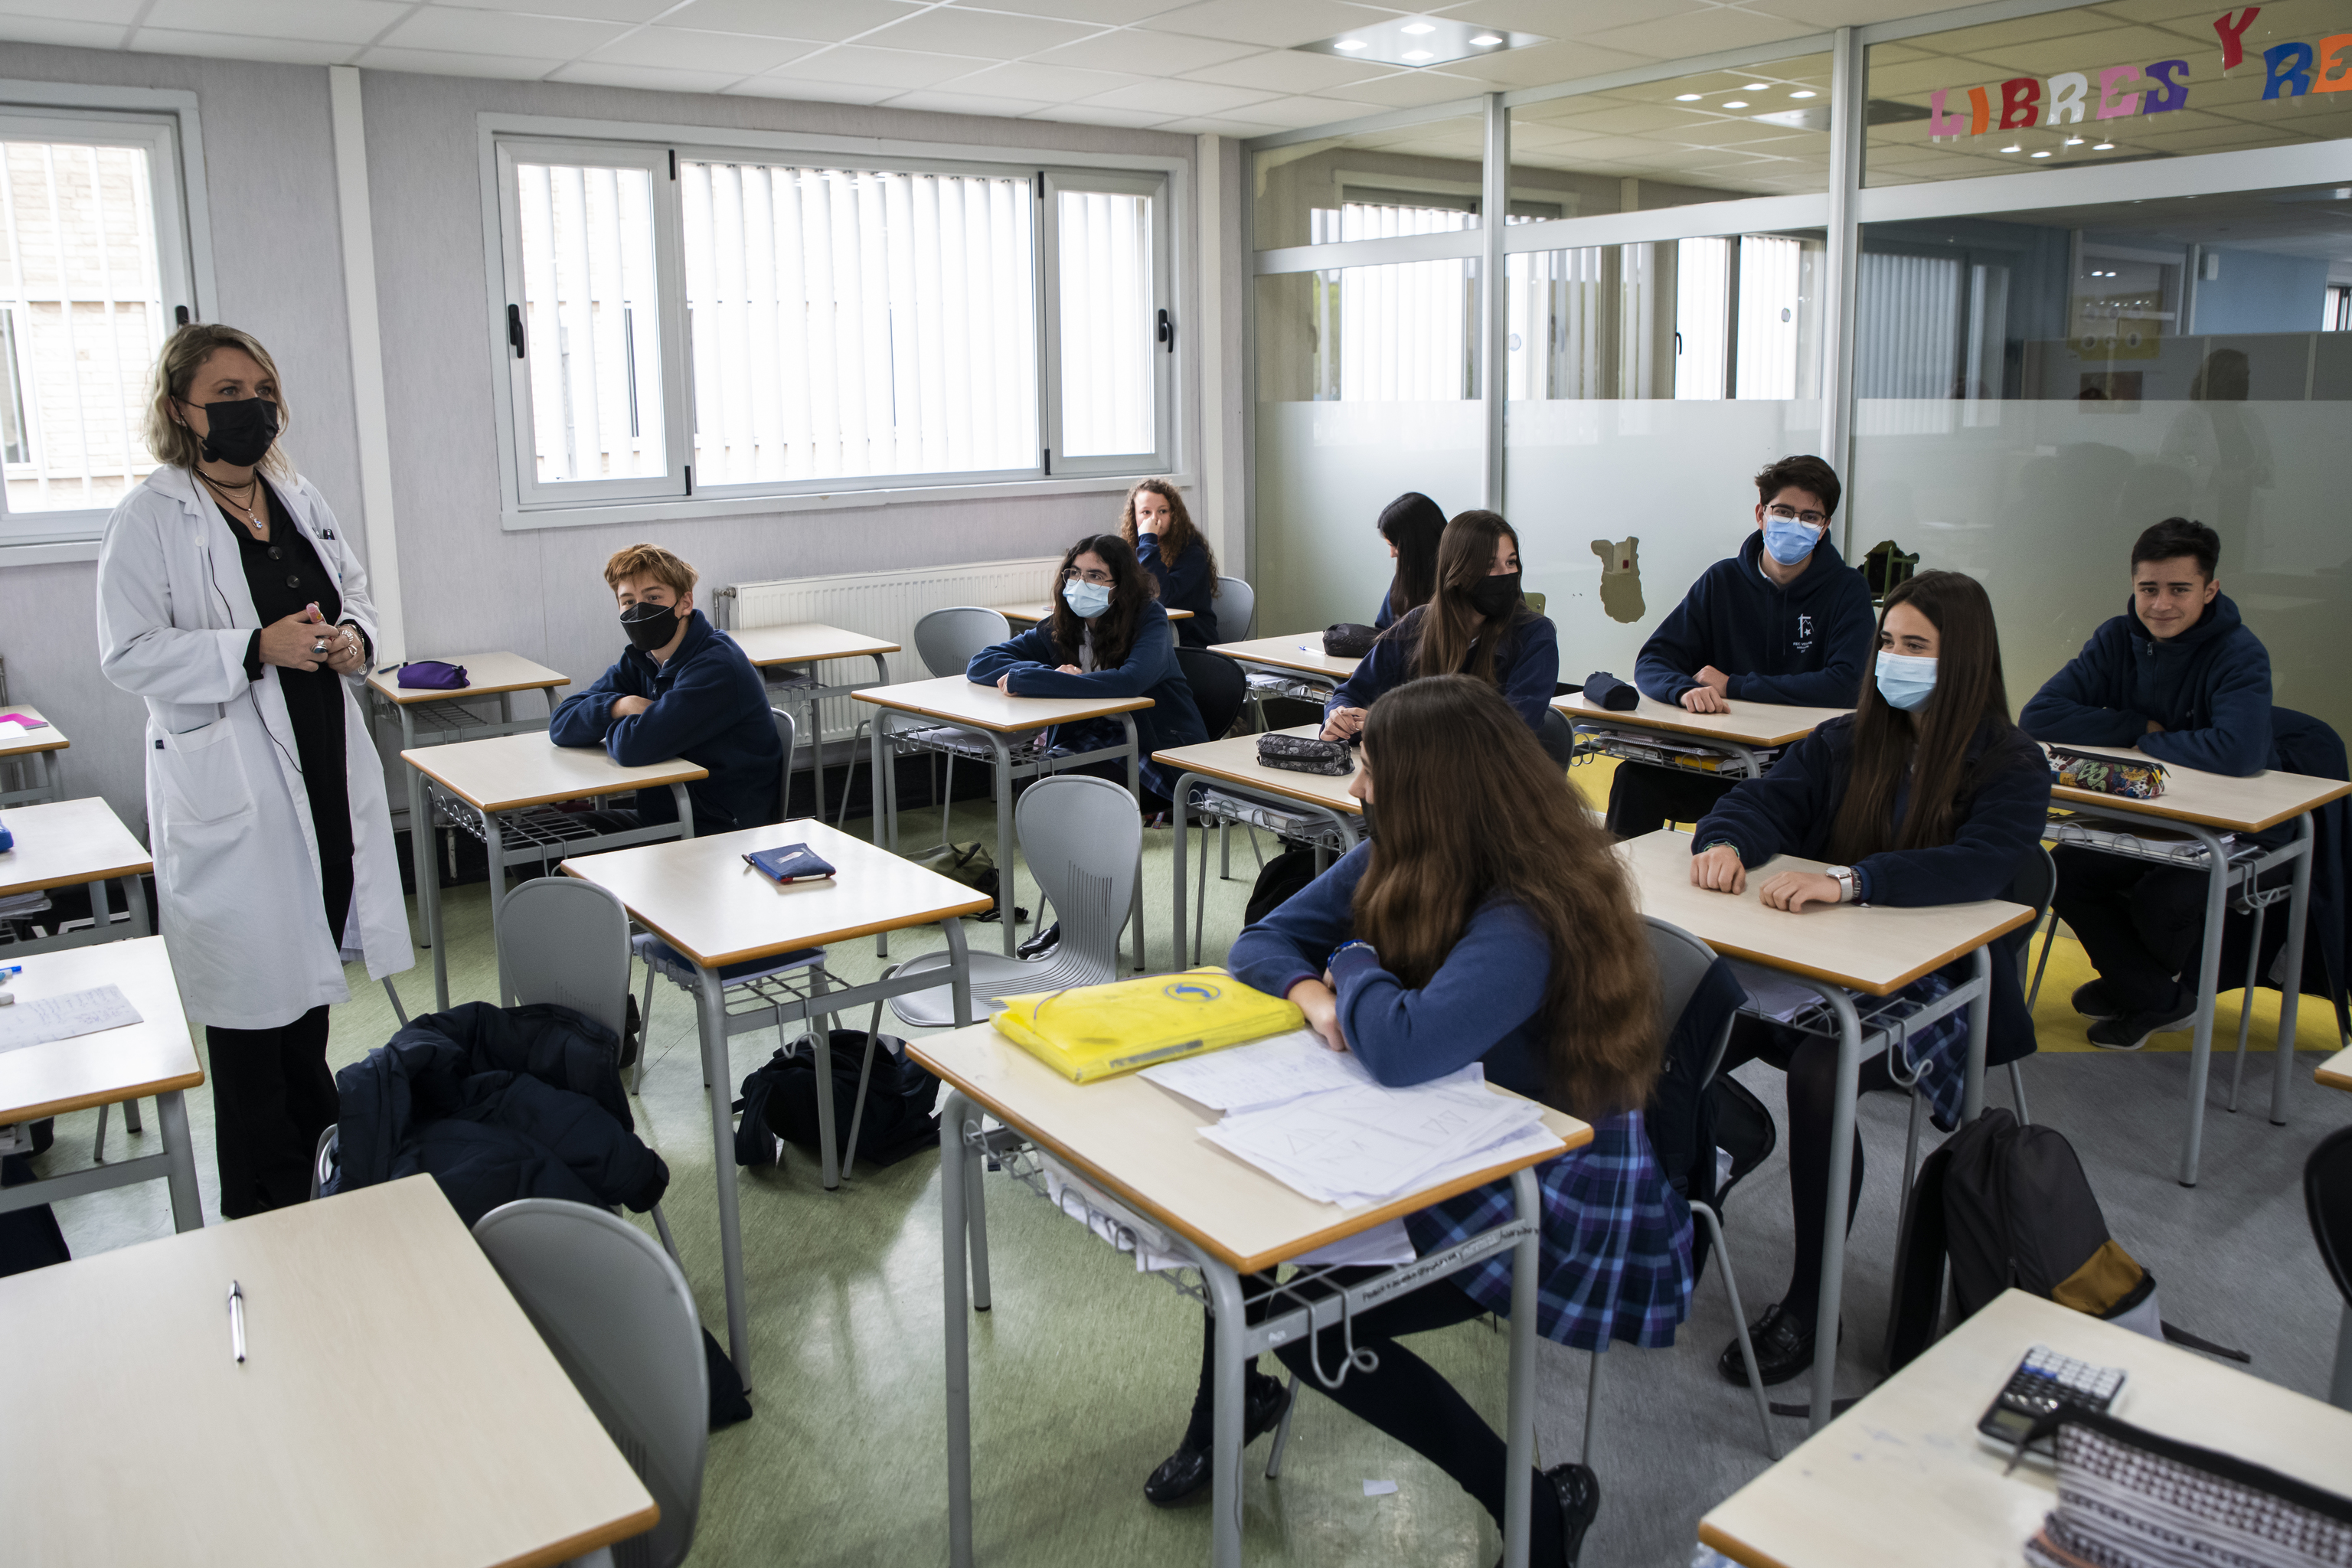 Students at the Santa Joaquina de Vedaruna School in Madrid are wearing masks despite the fact that they are not mandatory.